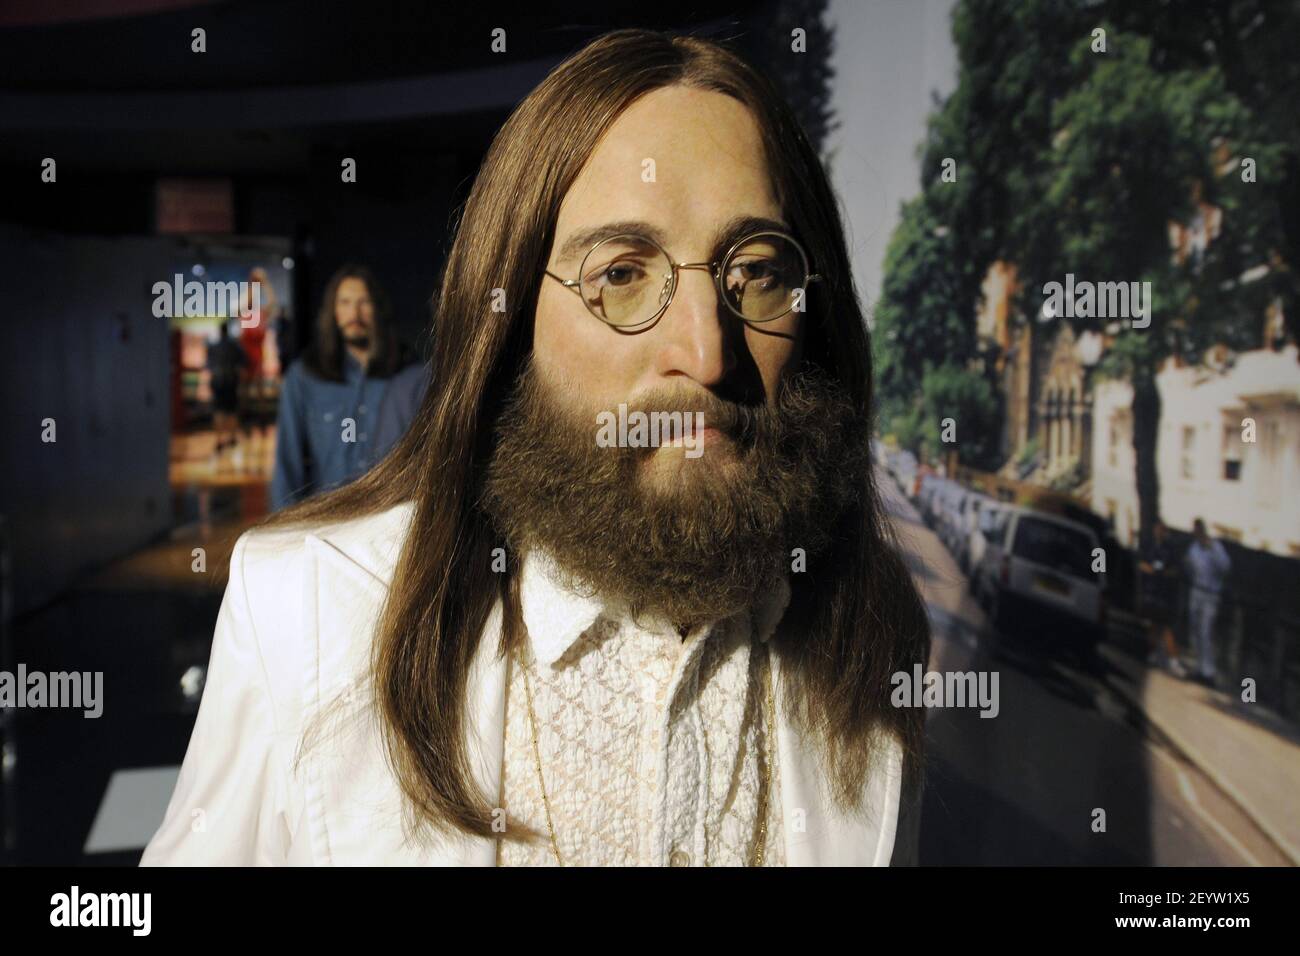 14 June 2012 - New York - The Beatles Wax figure of John Lennon, posed in homage of the 1969 'Abbey Road' album cover (photographed Iain Macmillan) is unveiled at Madame Tussauds New York on June 14, 2012, New York, NY. Photo Credit: Anthony Behar/Sipa USA Stock Photo